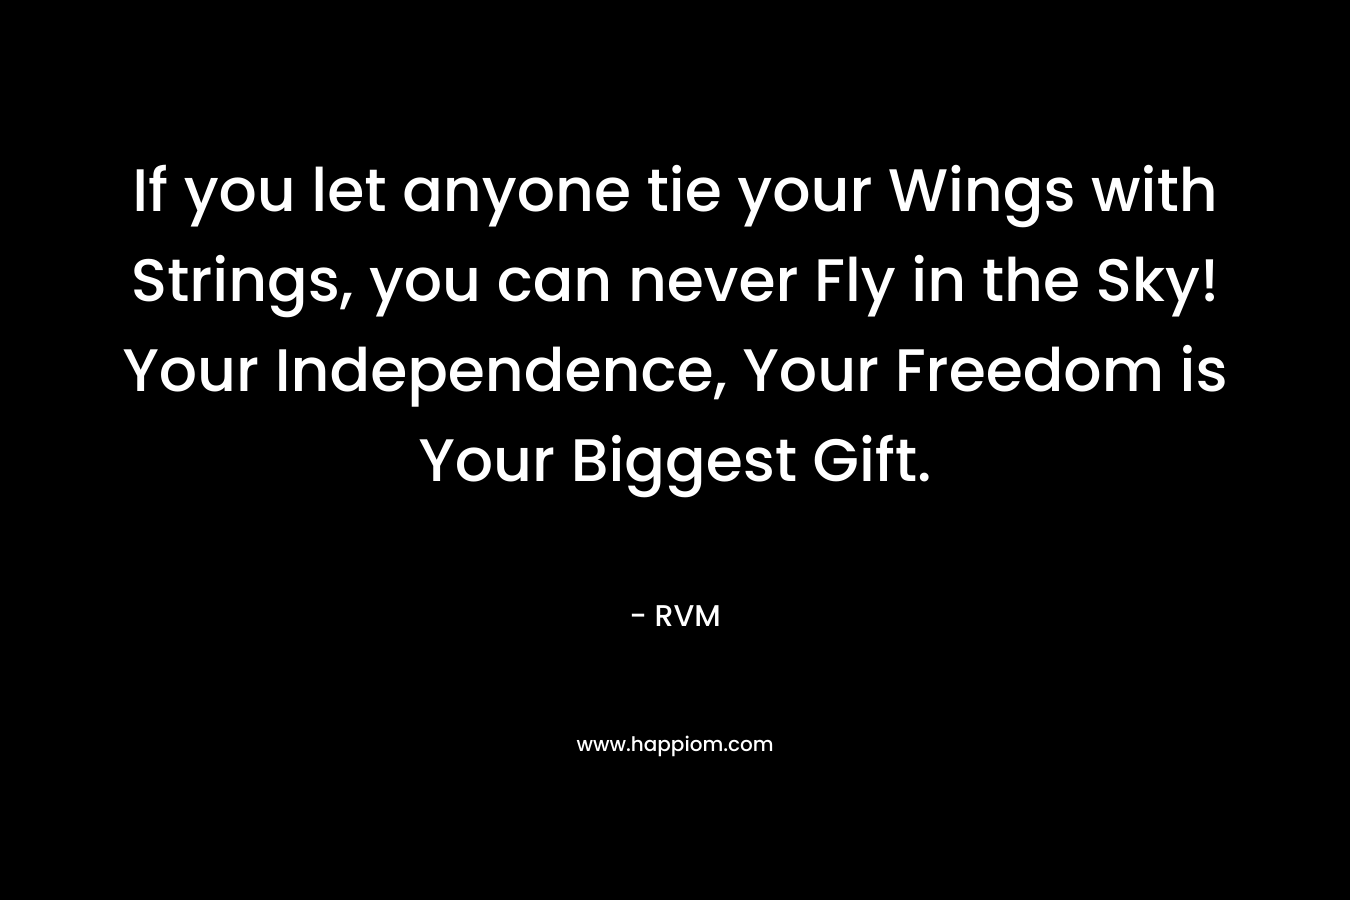 If you let anyone tie your Wings with Strings, you can never Fly in the Sky! Your Independence, Your Freedom is Your Biggest Gift.